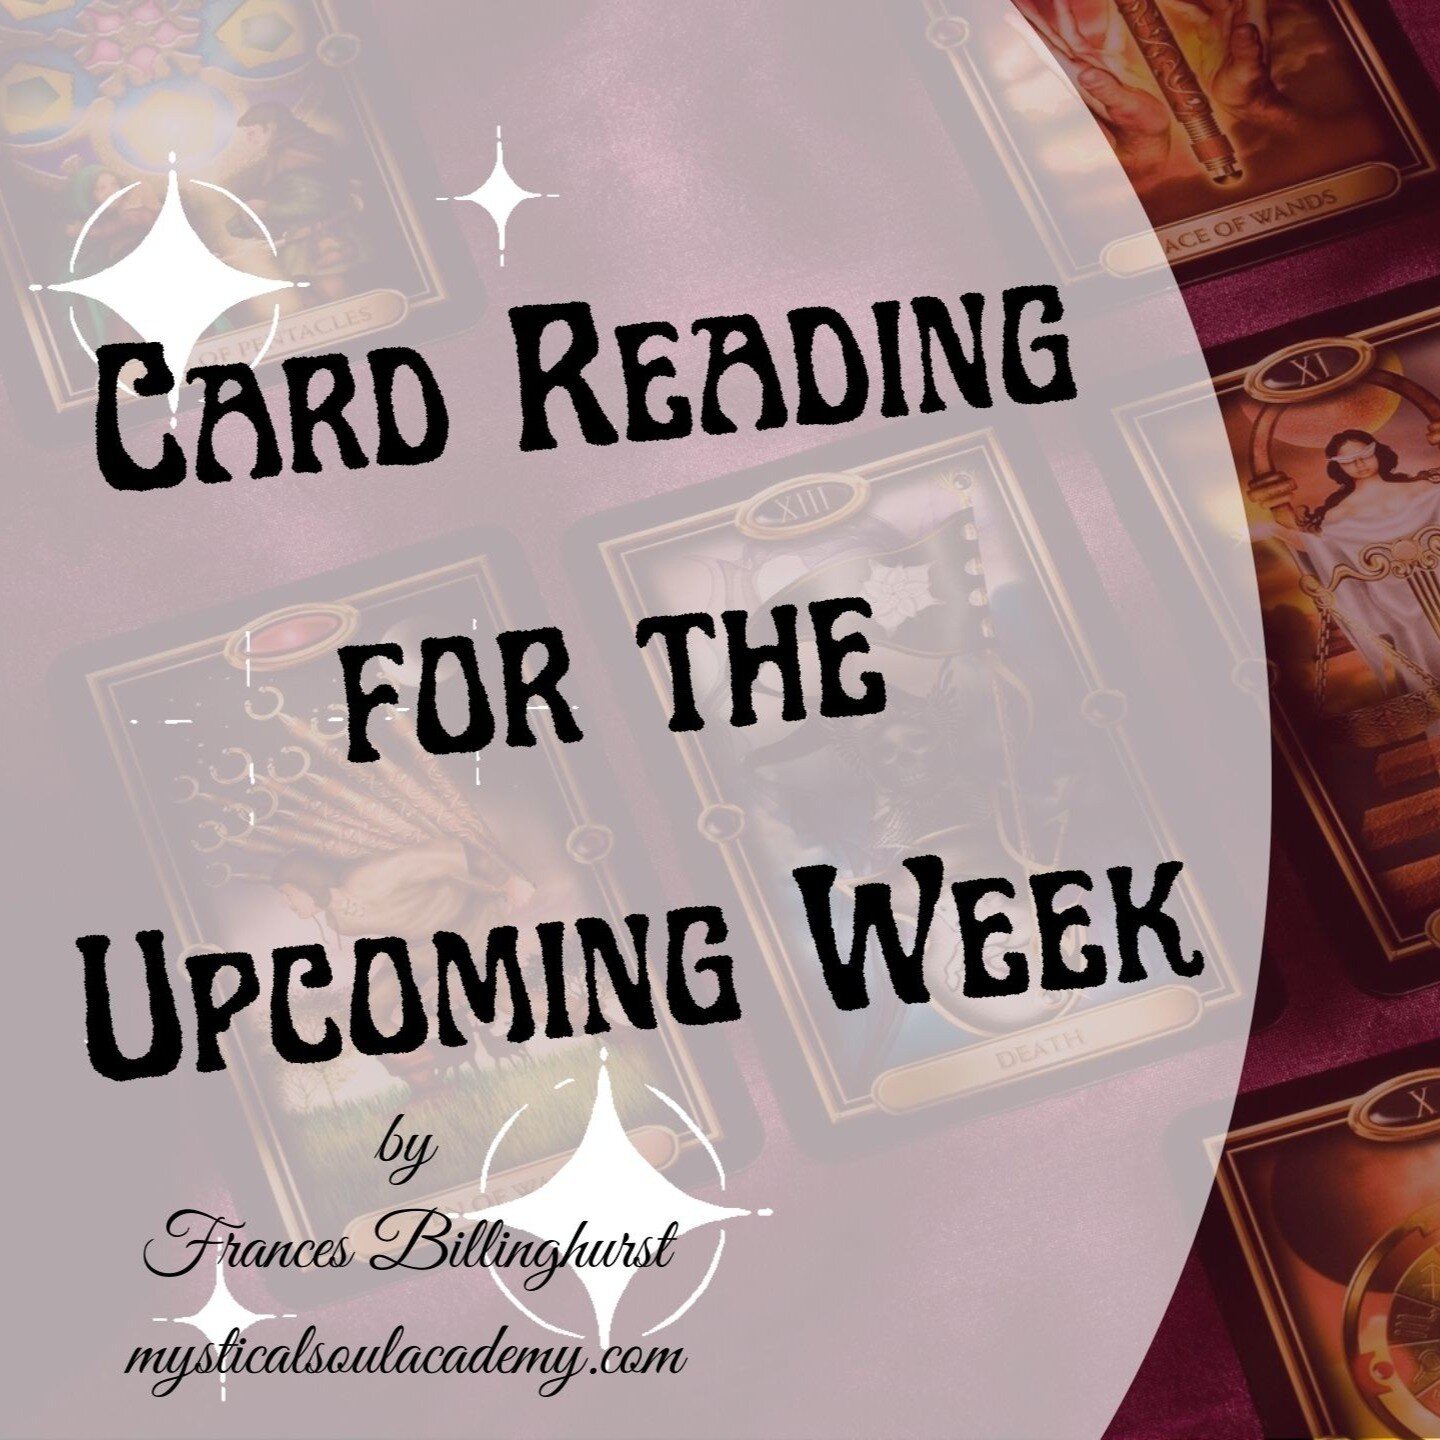 This week's card reading is now available.

There are four cards for this week:
UNEXPECTED VISITORS, COMING APART (reversed), SPIRIT OF PLACE, and STRENGTH (reversed).

What are you thoughts? Do you resonate with the cards? 
Leave your comments below